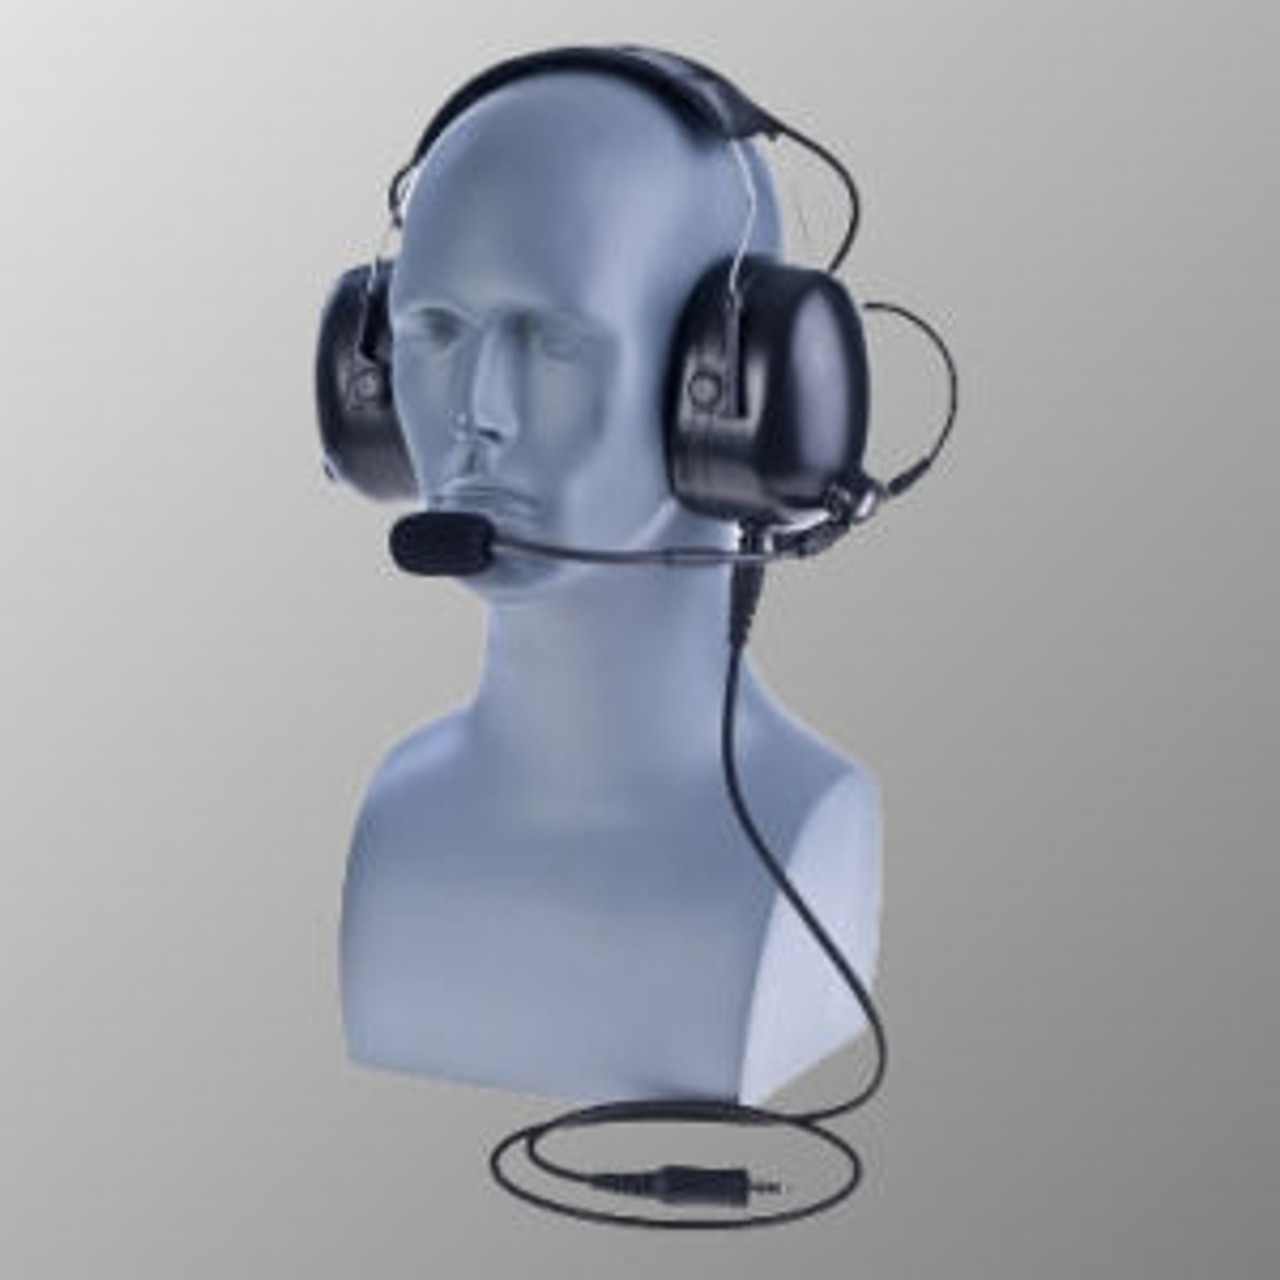 HYT / Hytera PD782 Over The Head Double Muff Headset